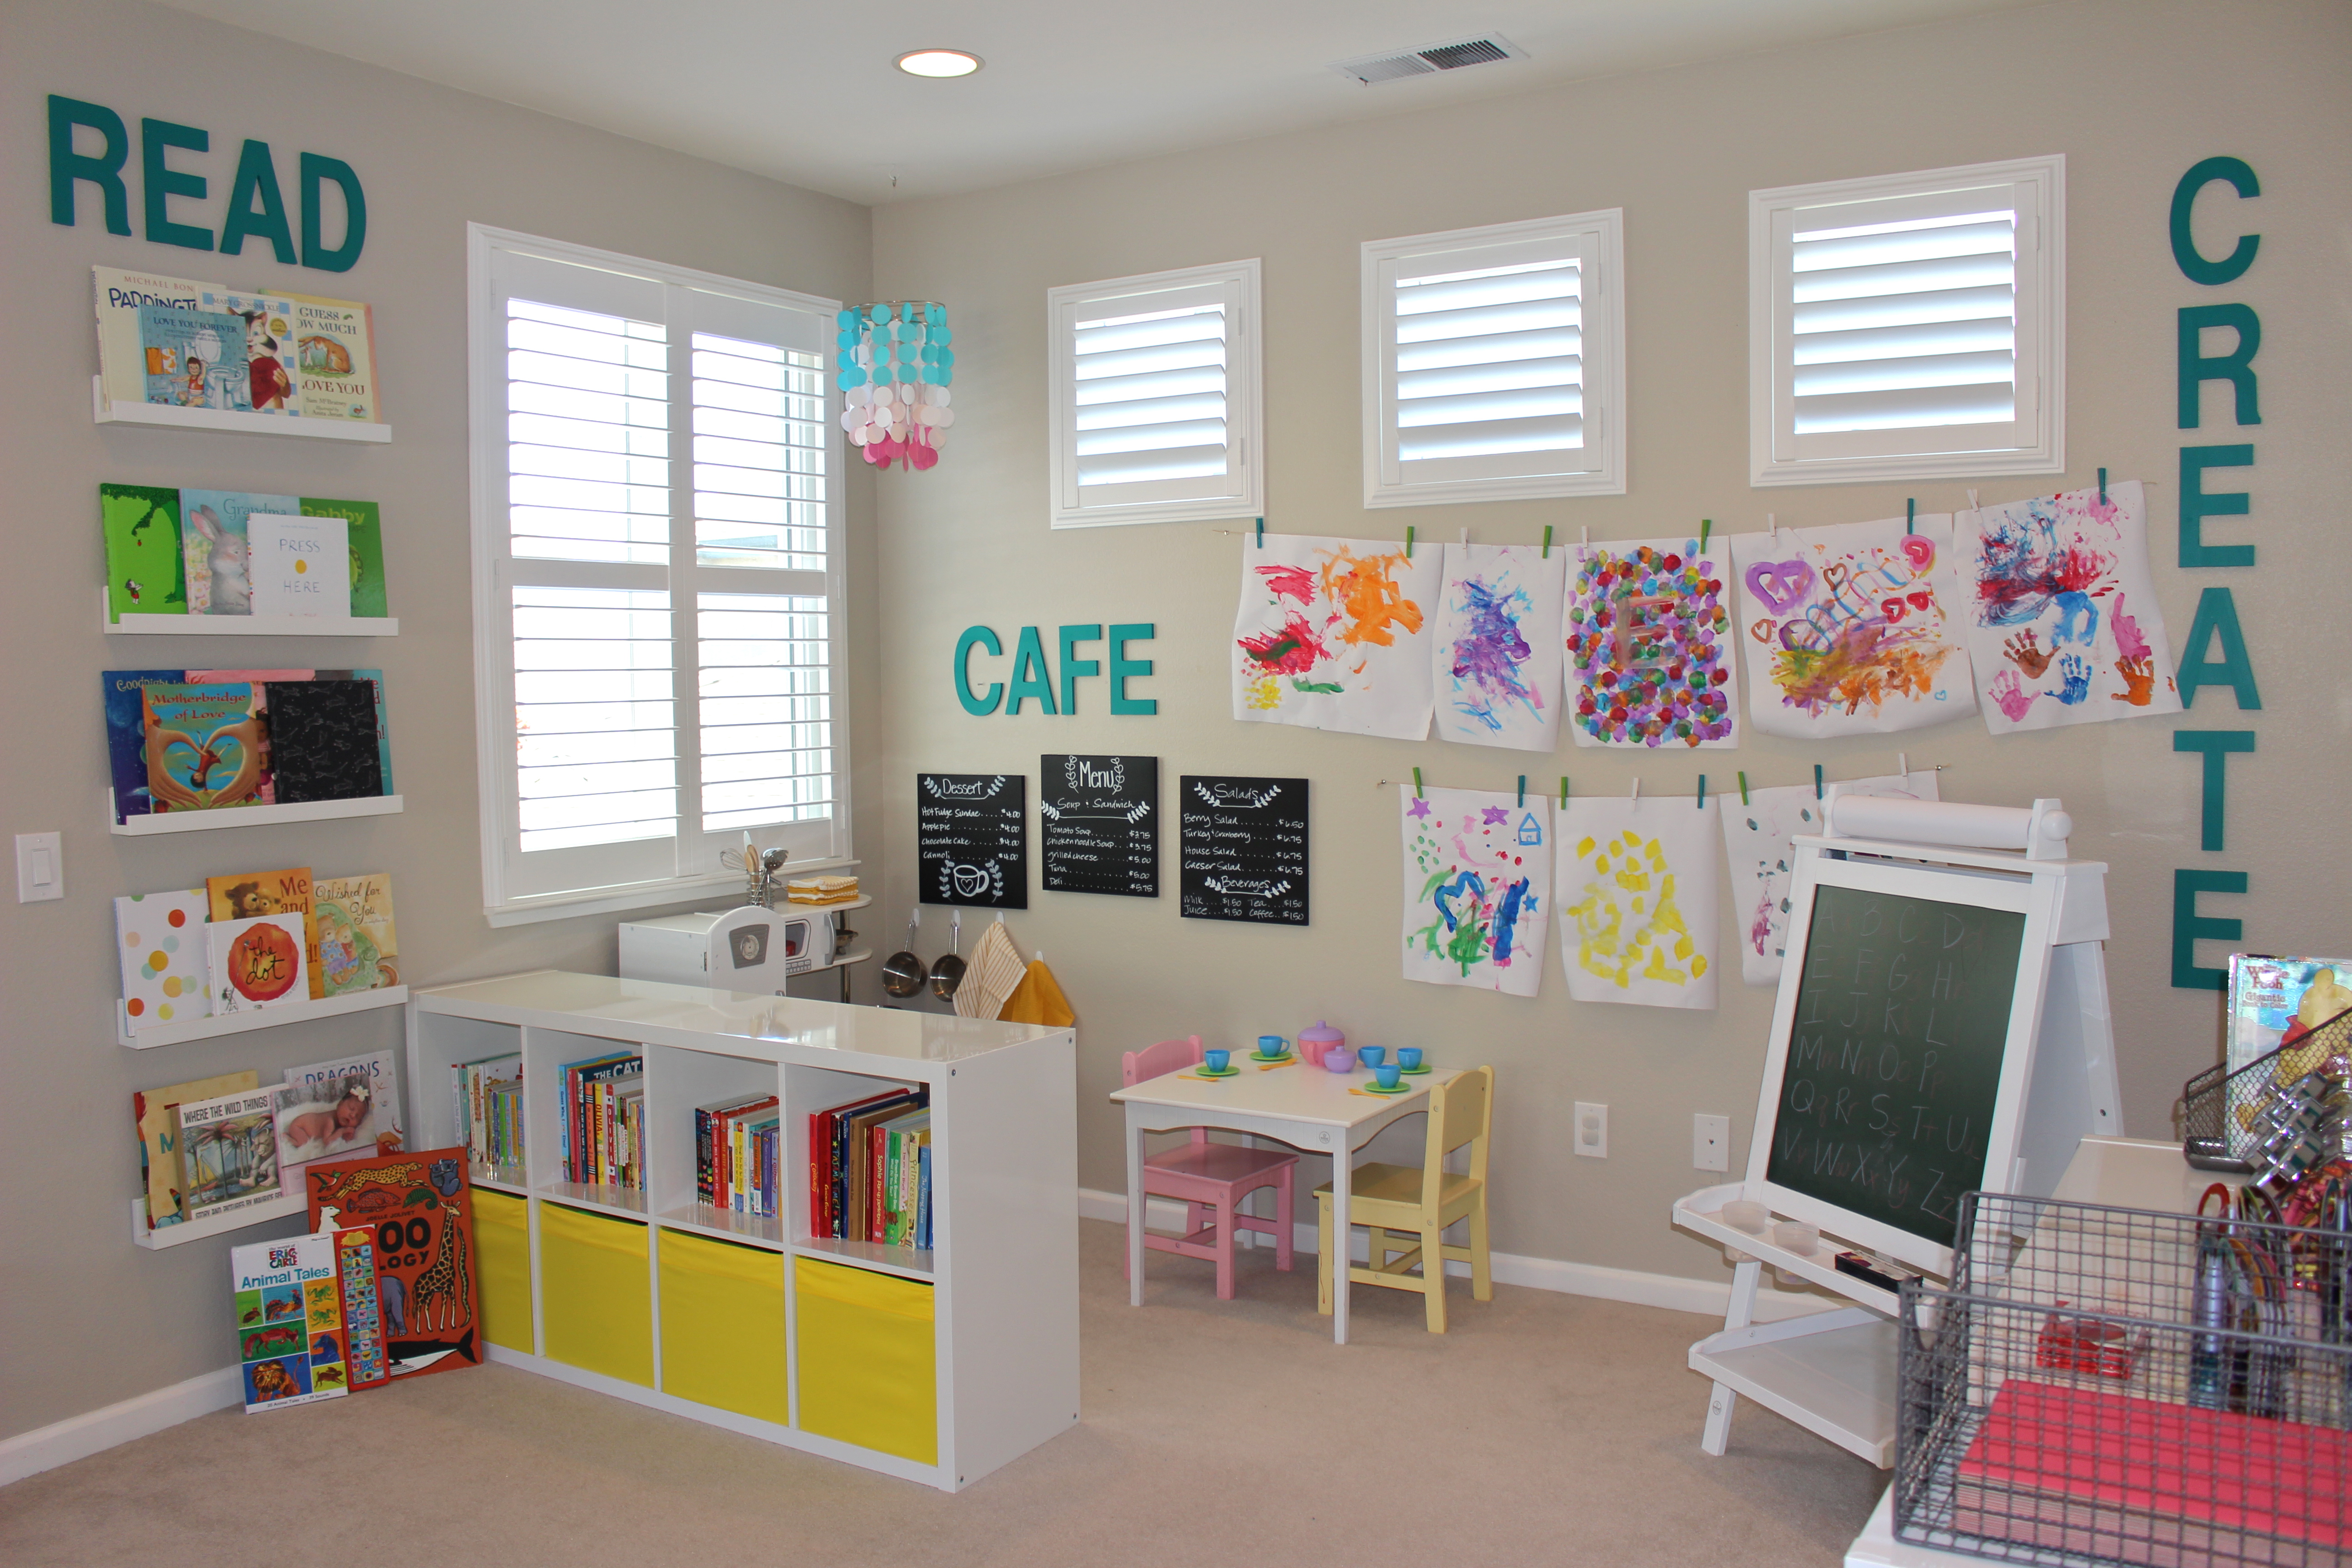 Space Requirements For Nursery School